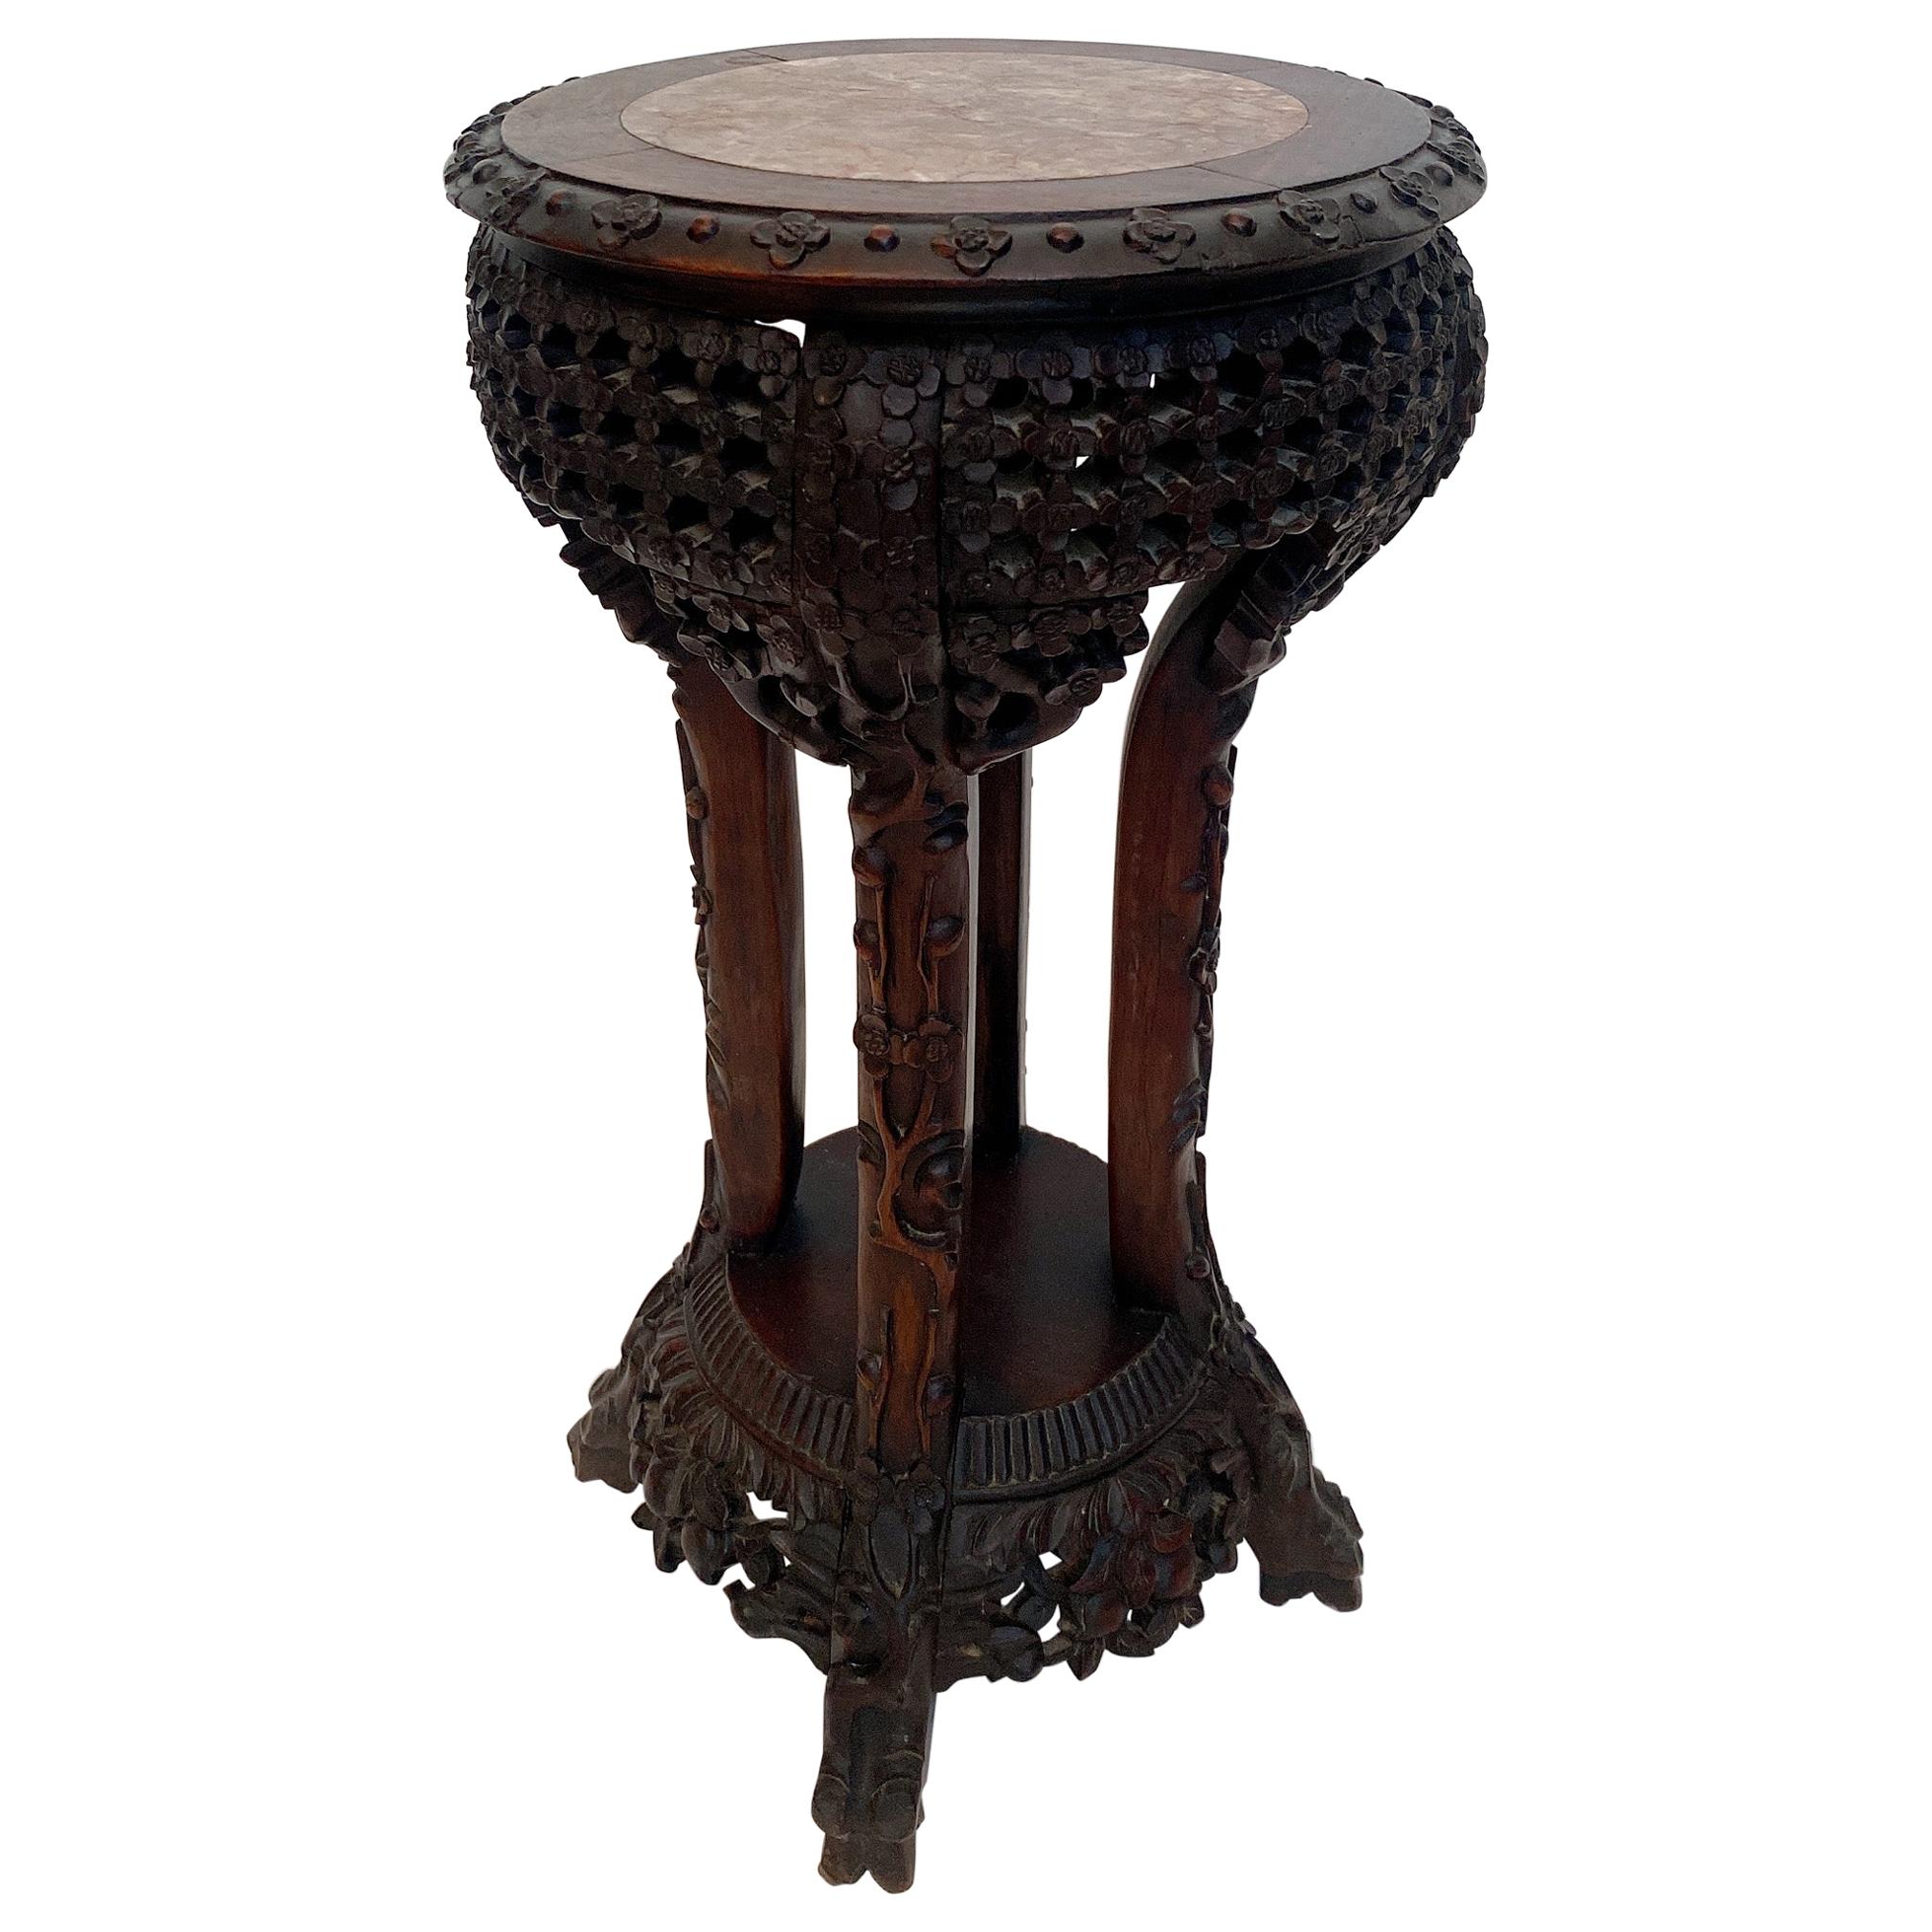 Antique Chinese Carved Hardwood Flower Stands Marble-Top Insert For Sale